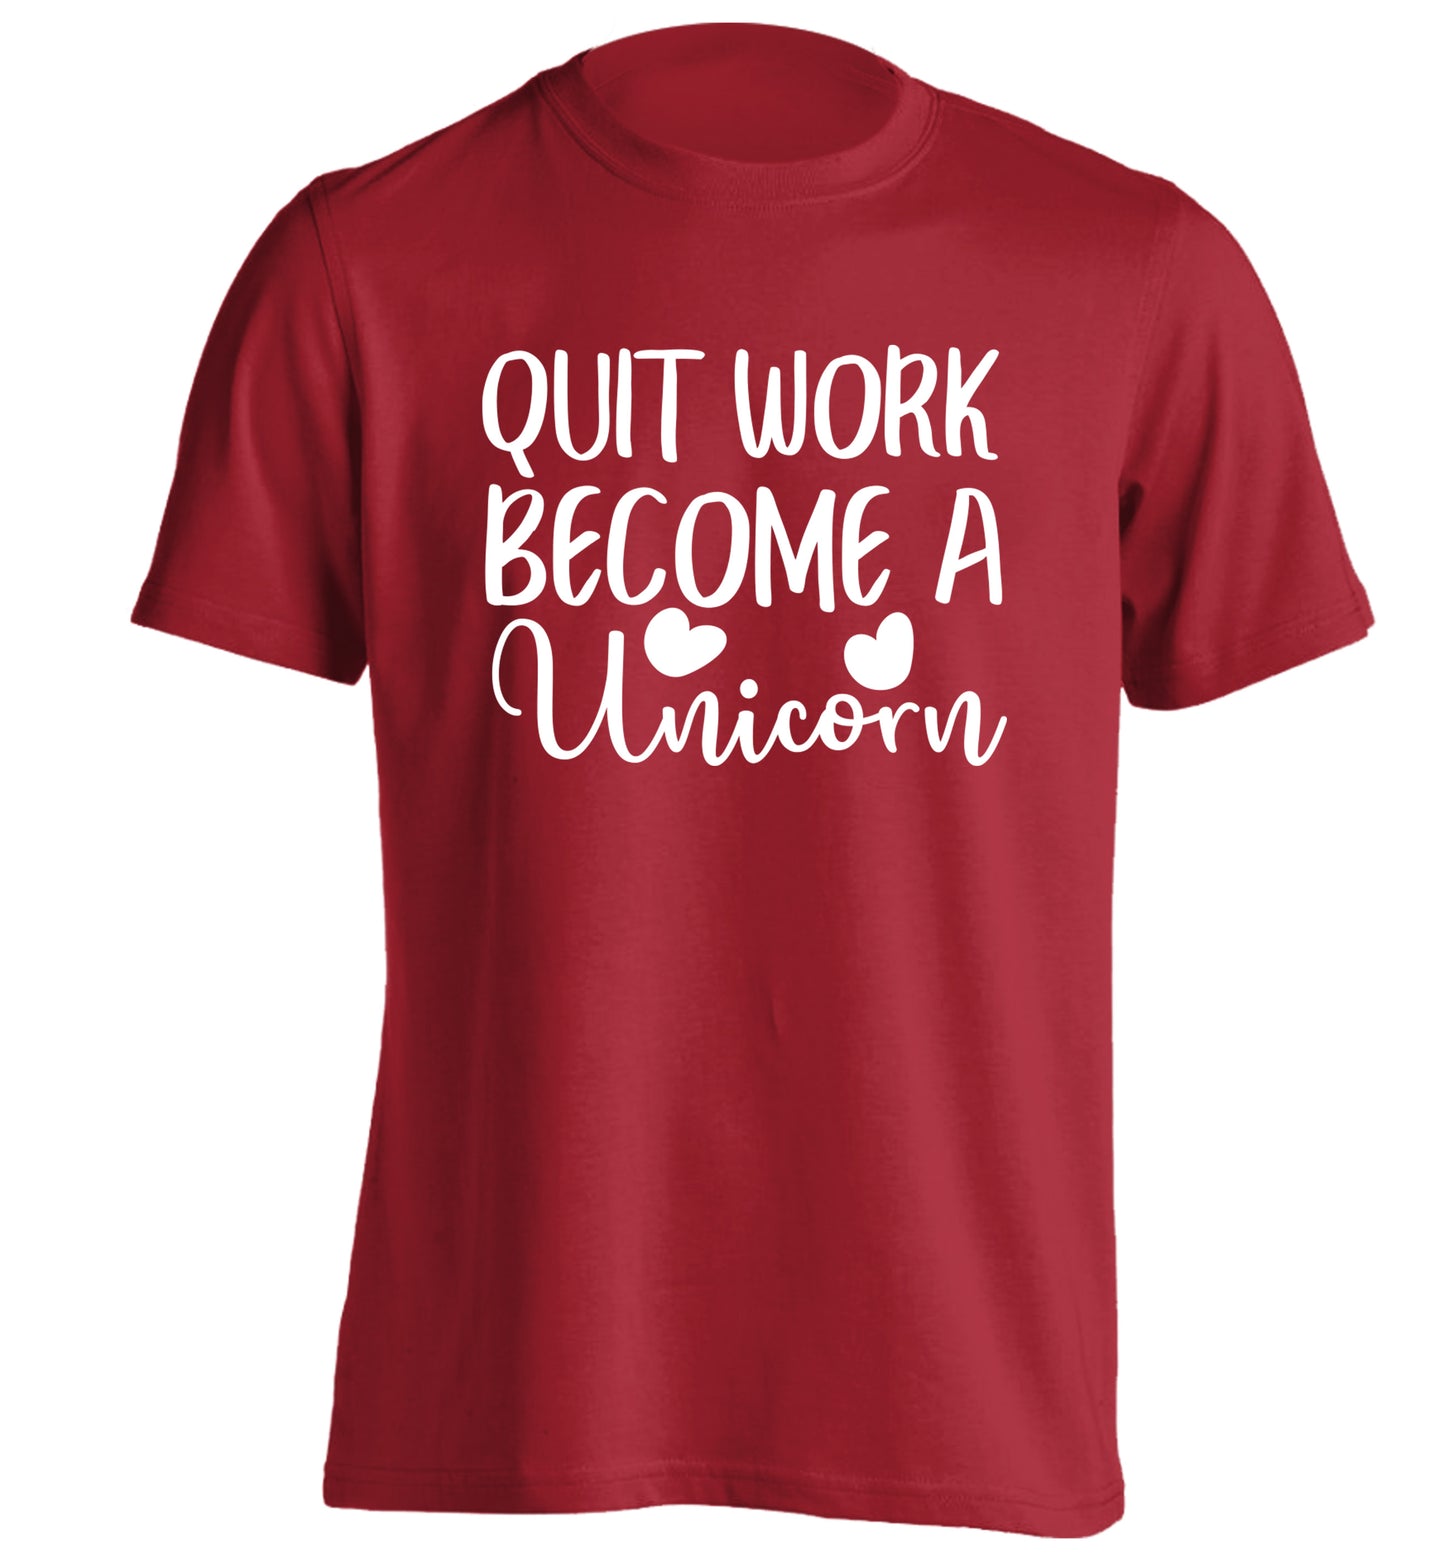 Quit work become a unicorn adults unisex red Tshirt 2XL